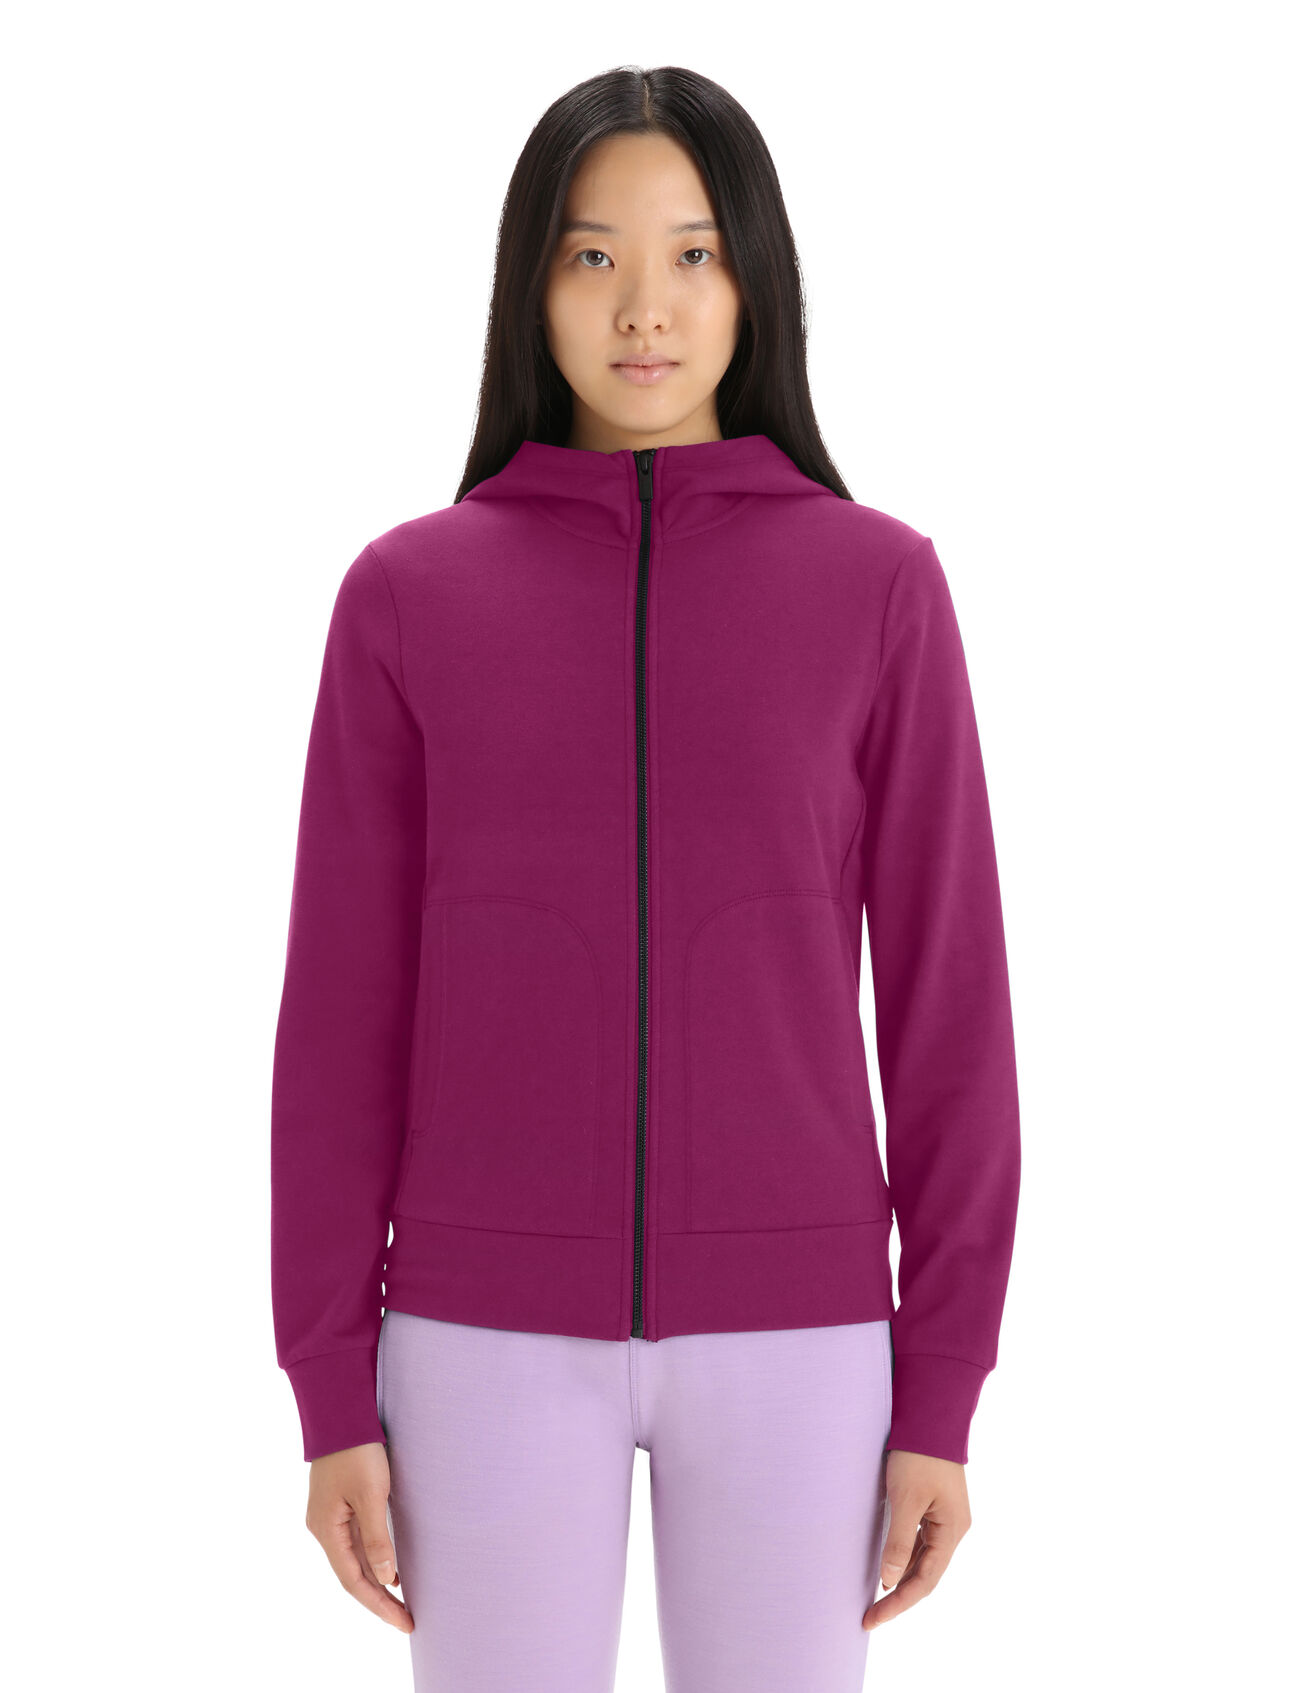 Womens Merino Central Classic Long Sleeve Zip Hoodie A comfy, classic and stylish everyday hooded sweatshirt that blends natural merino wool with organically grown cotton, the Central Classic Long Sleeve Zip Hoodie is durable, breathable and incredibly versatile.  